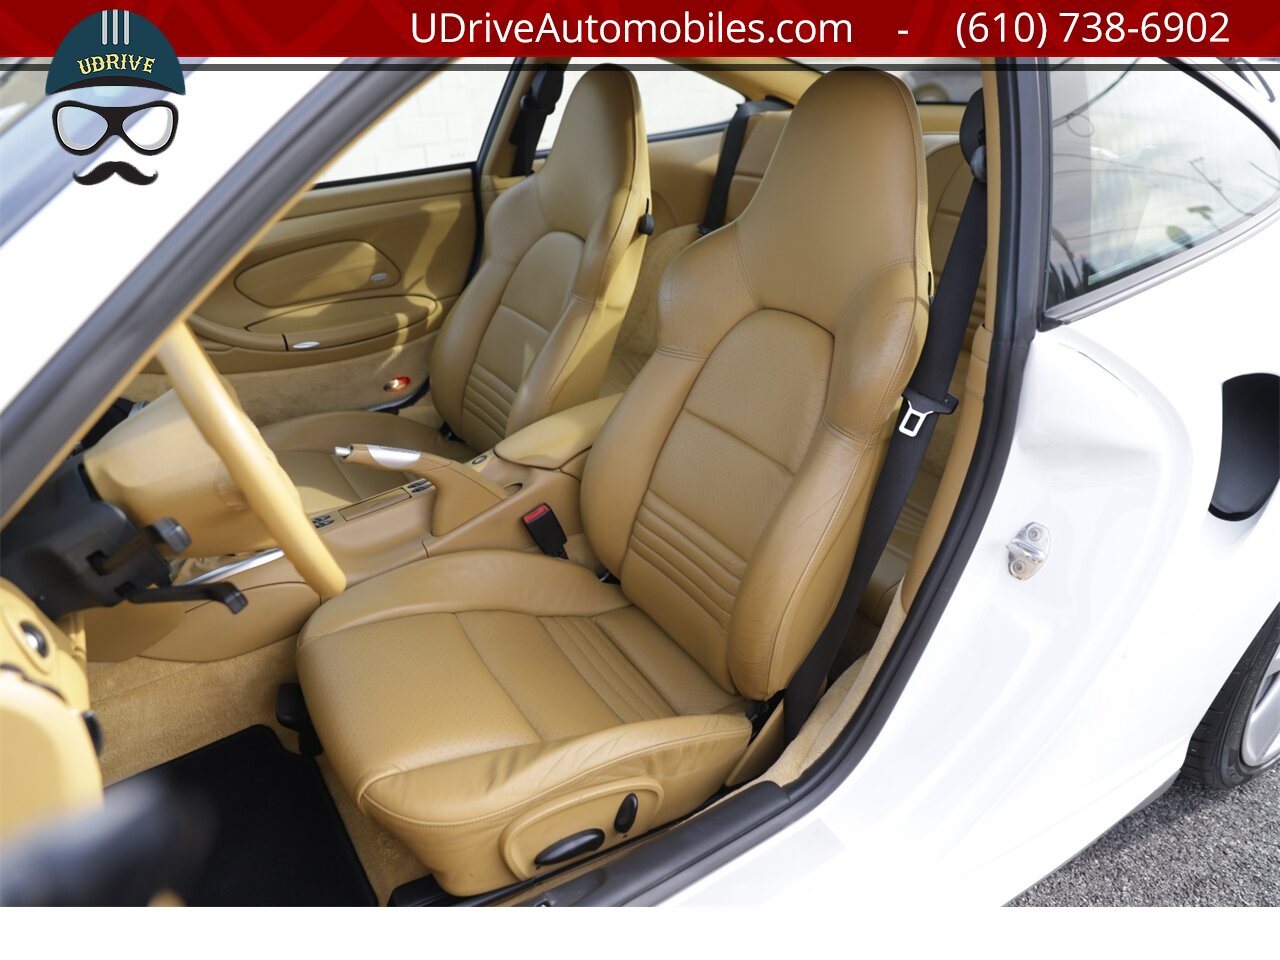 2003 Porsche 911 Turbo 996 6 Speed Carrara White Sport Seats  Detailed Service History - Photo 27 - West Chester, PA 19382